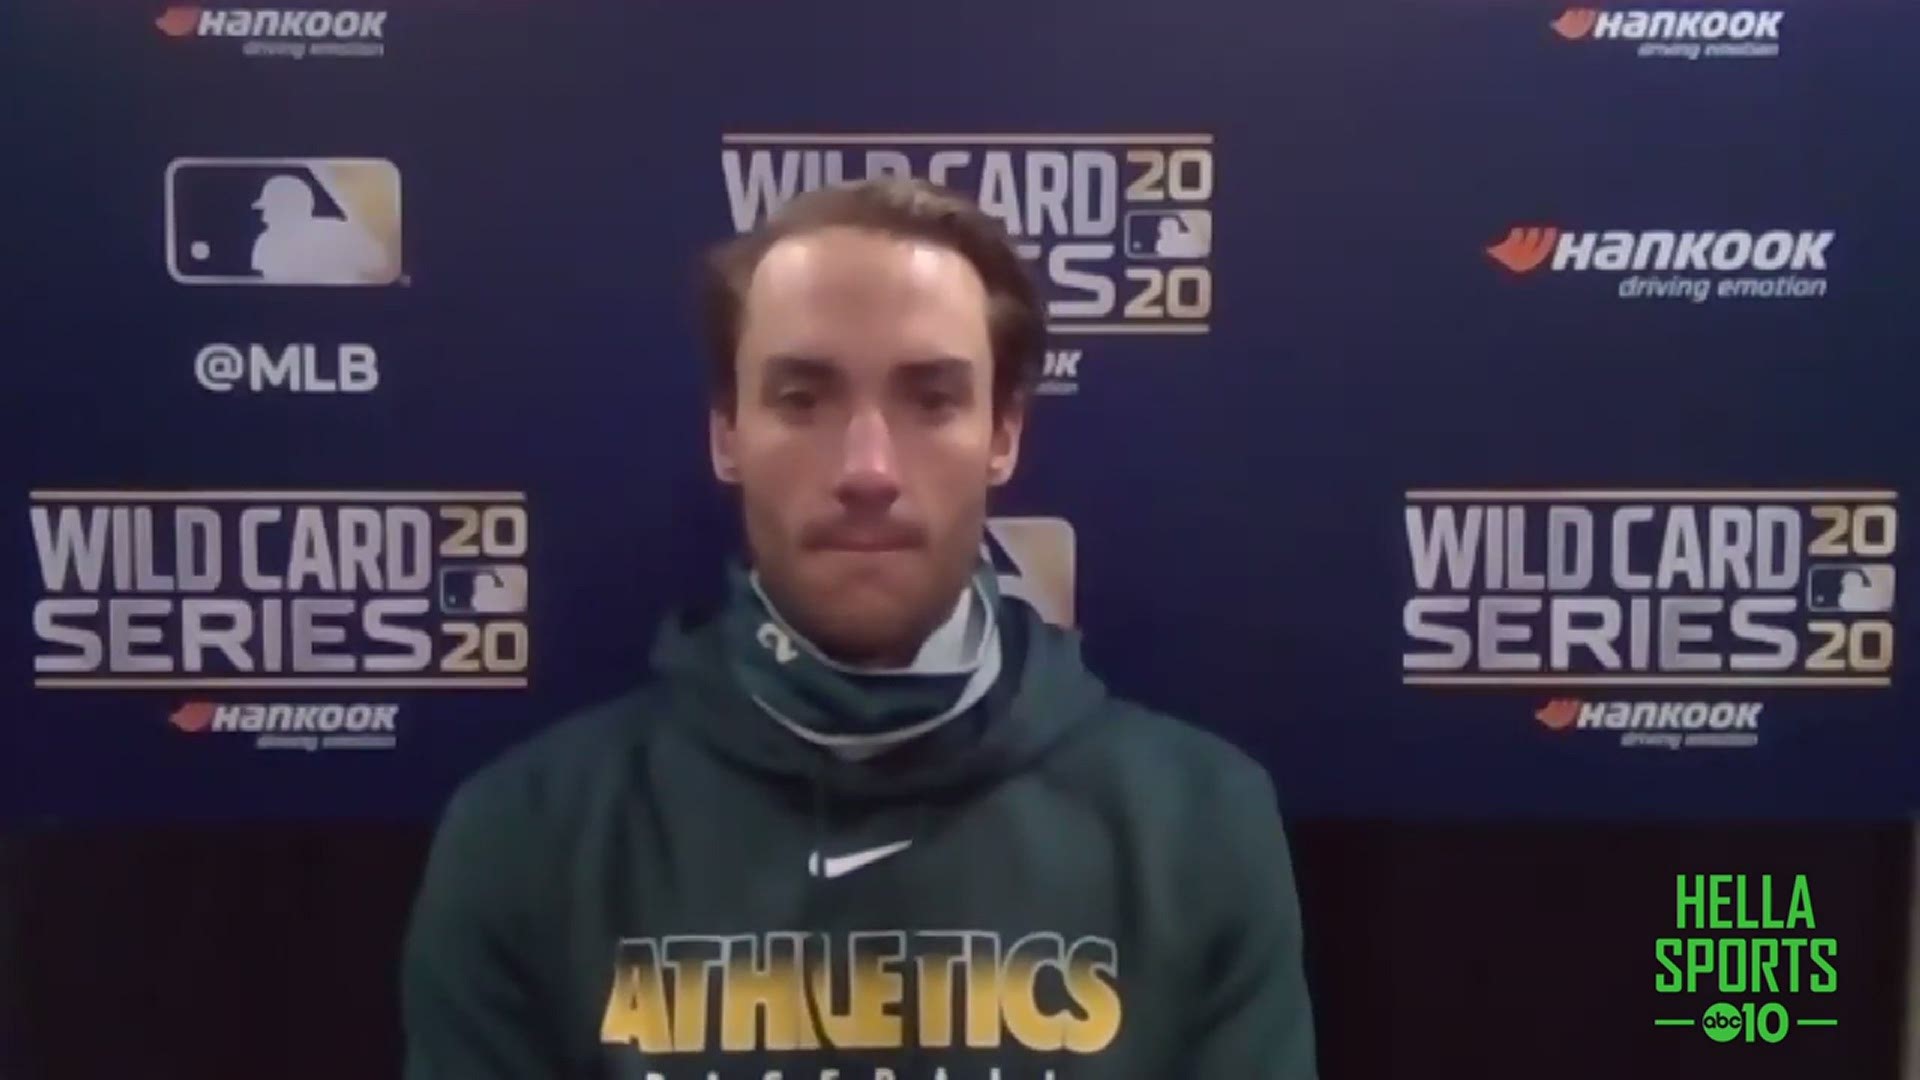 A's first baseman Matt Olson talks about Tuesday's 4-1 loss to the Chicago White Sox to open the Wild Card series and his belief that Oakland can bounce-back.